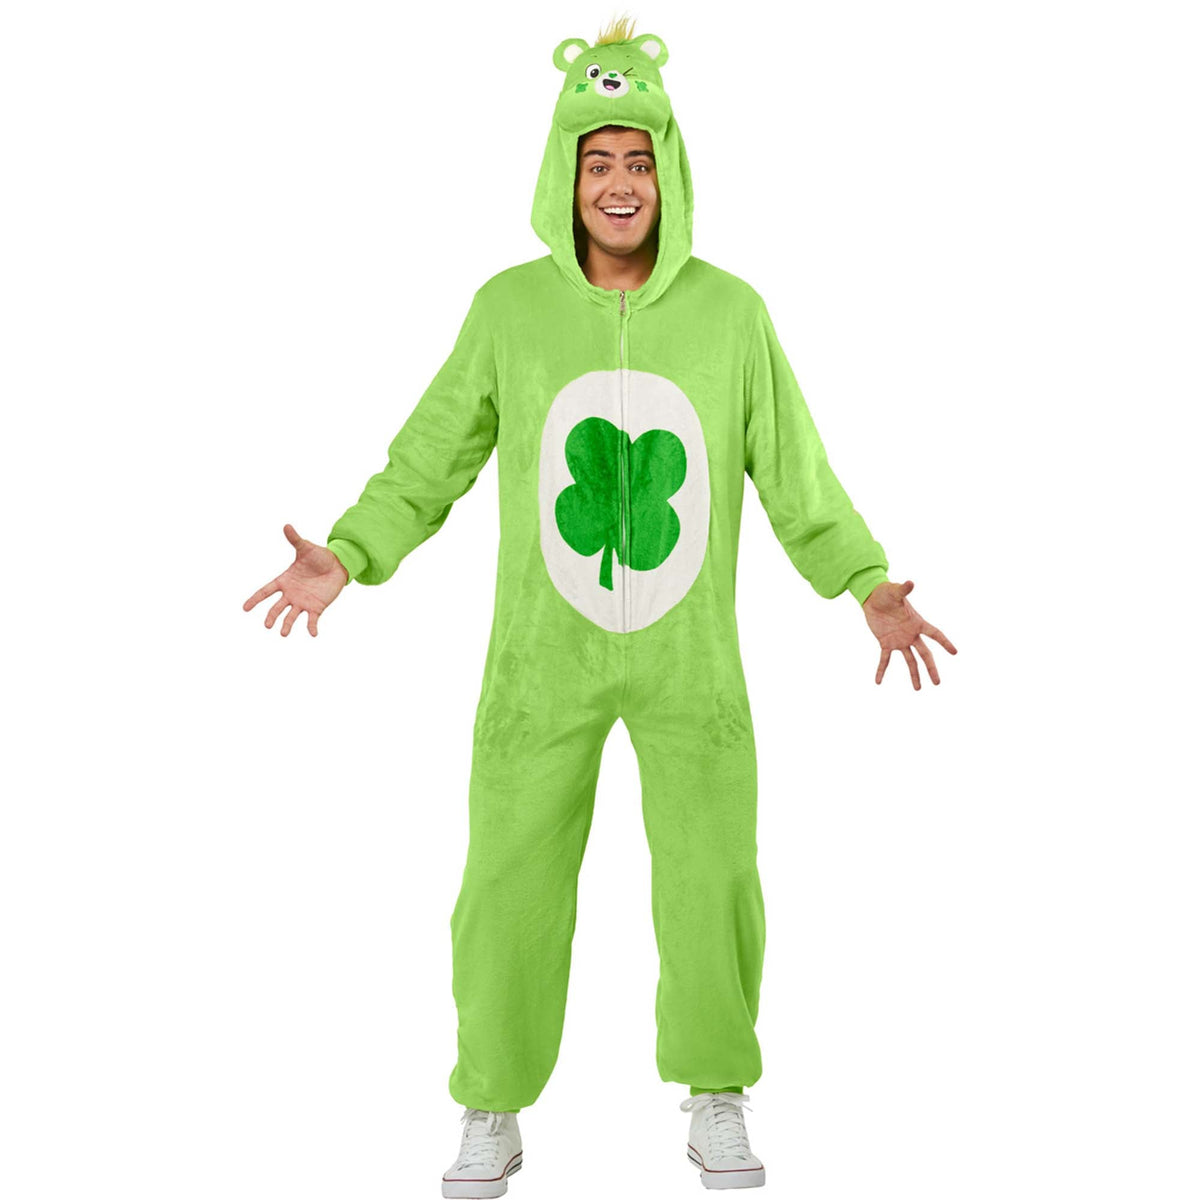 RUBIES II (Ruby Slipper Sales) Costumes Care Bears Good Luck Bear Costume for Adults, Green Jumpsuit with Hood